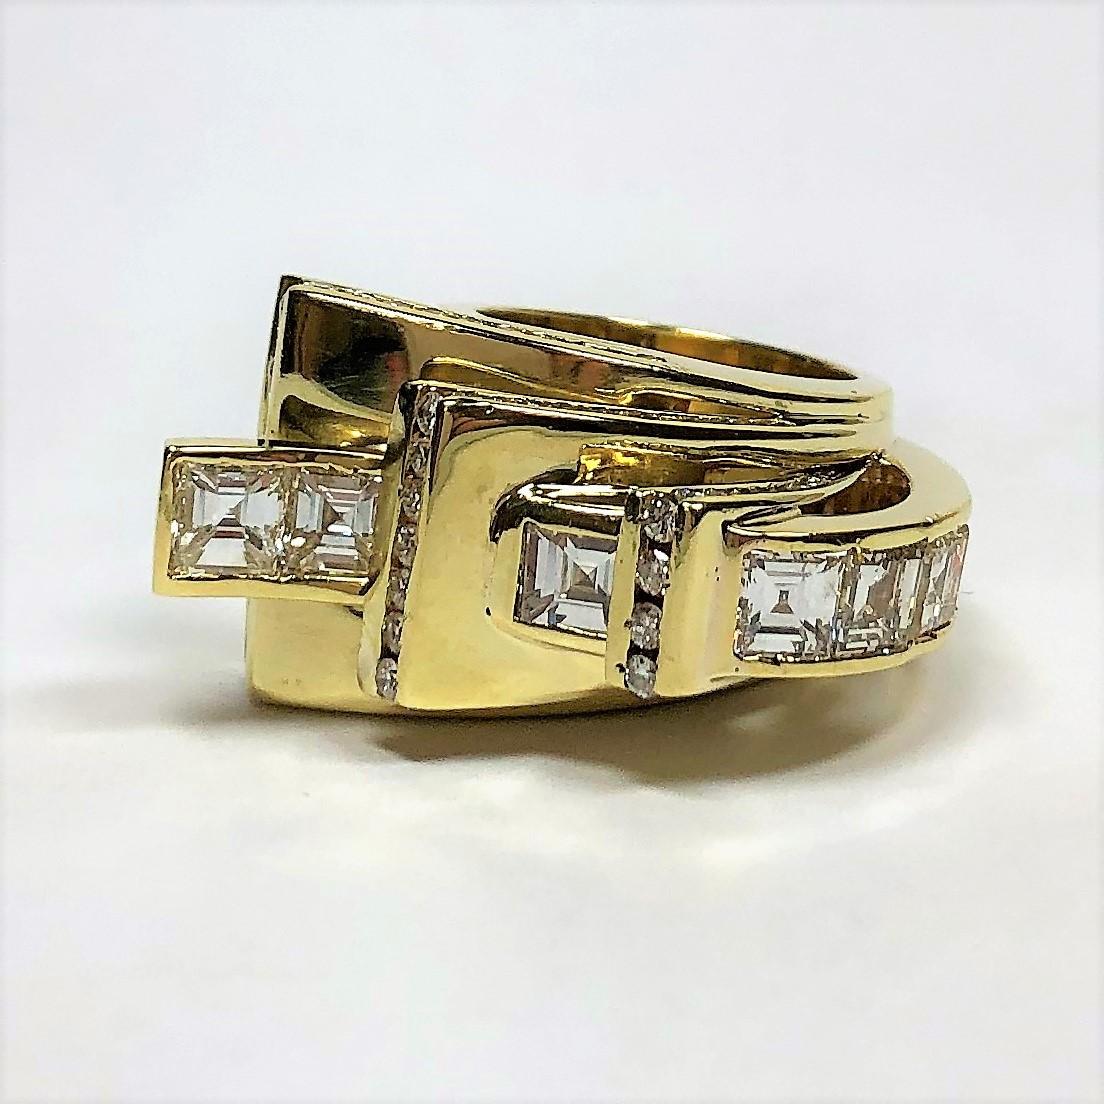 Made of 18K Yellow Gold and set with assorted mirror cut and round brilliant cut diamonds weighing a total approximate weight of 6.10CT, of overall G/H Color and VS2 Clarity, this over the top ring was most probably made in the 1960s to look like a